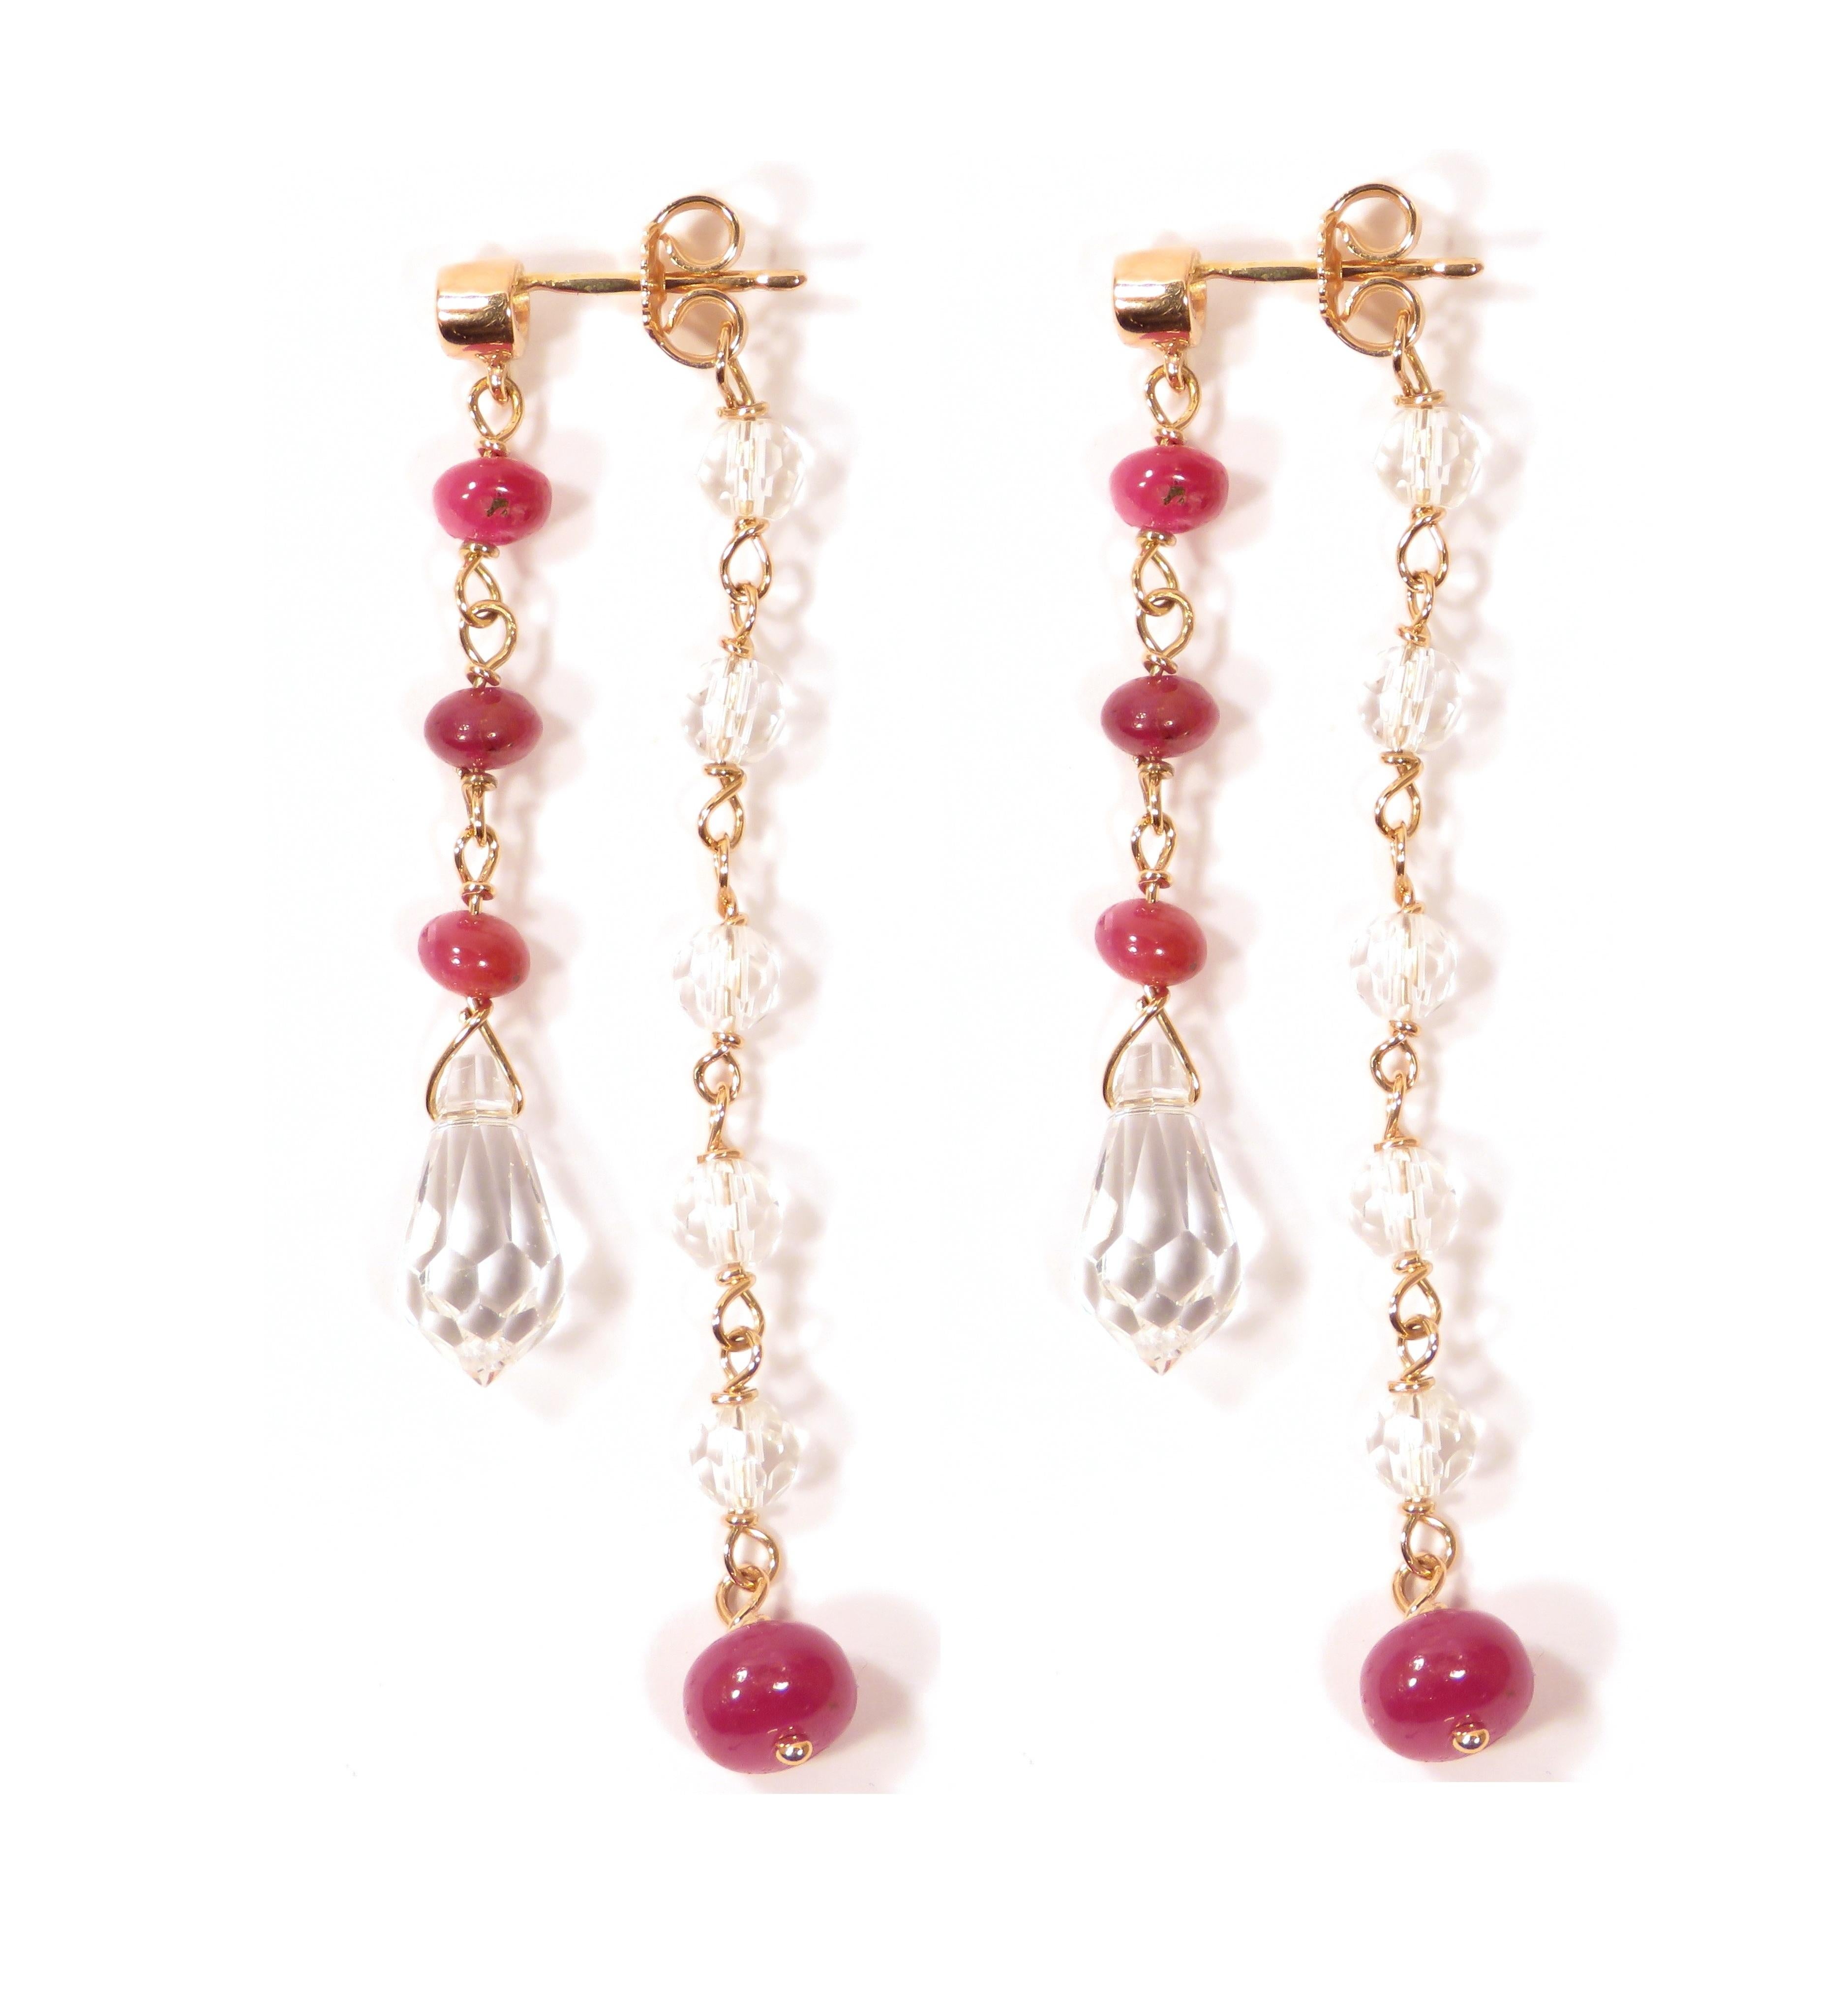 Dangle earrings in 9 karat rose gold with 2 brown diamonds 0.05 ctw, real rubies and rock crystal gemstones. The front length of each earring is 42 mm / 1.653 inches, the back length is 48 mm / 1.889 inches. These earrings are handcrafted in Italy